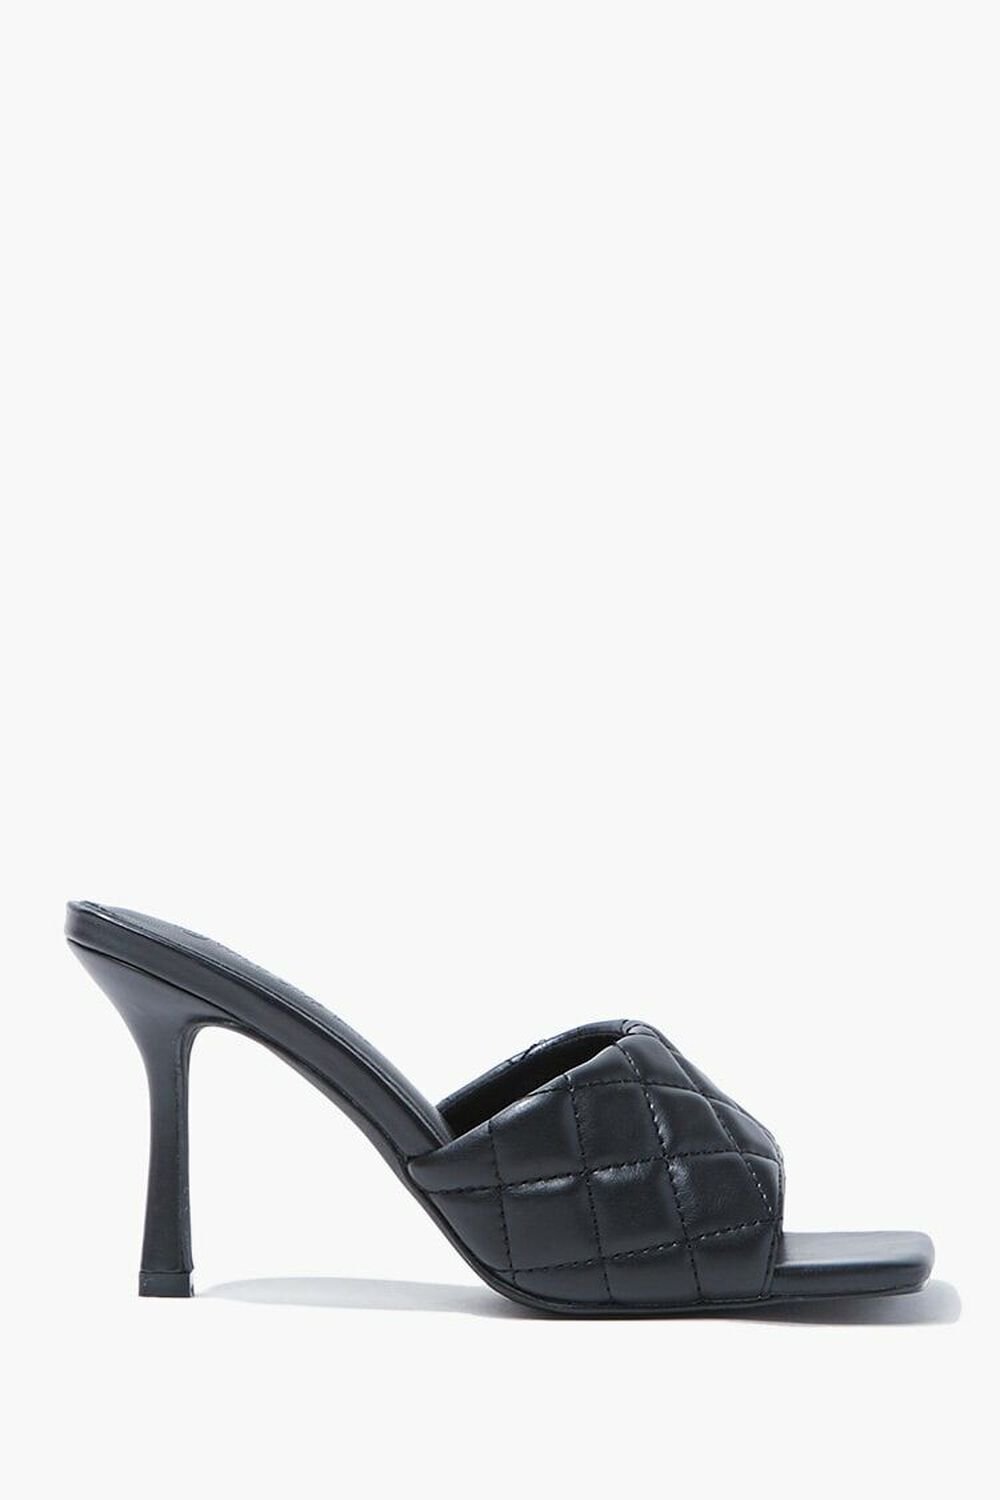 BLACK Quilted Square-Toe Heels, image 1